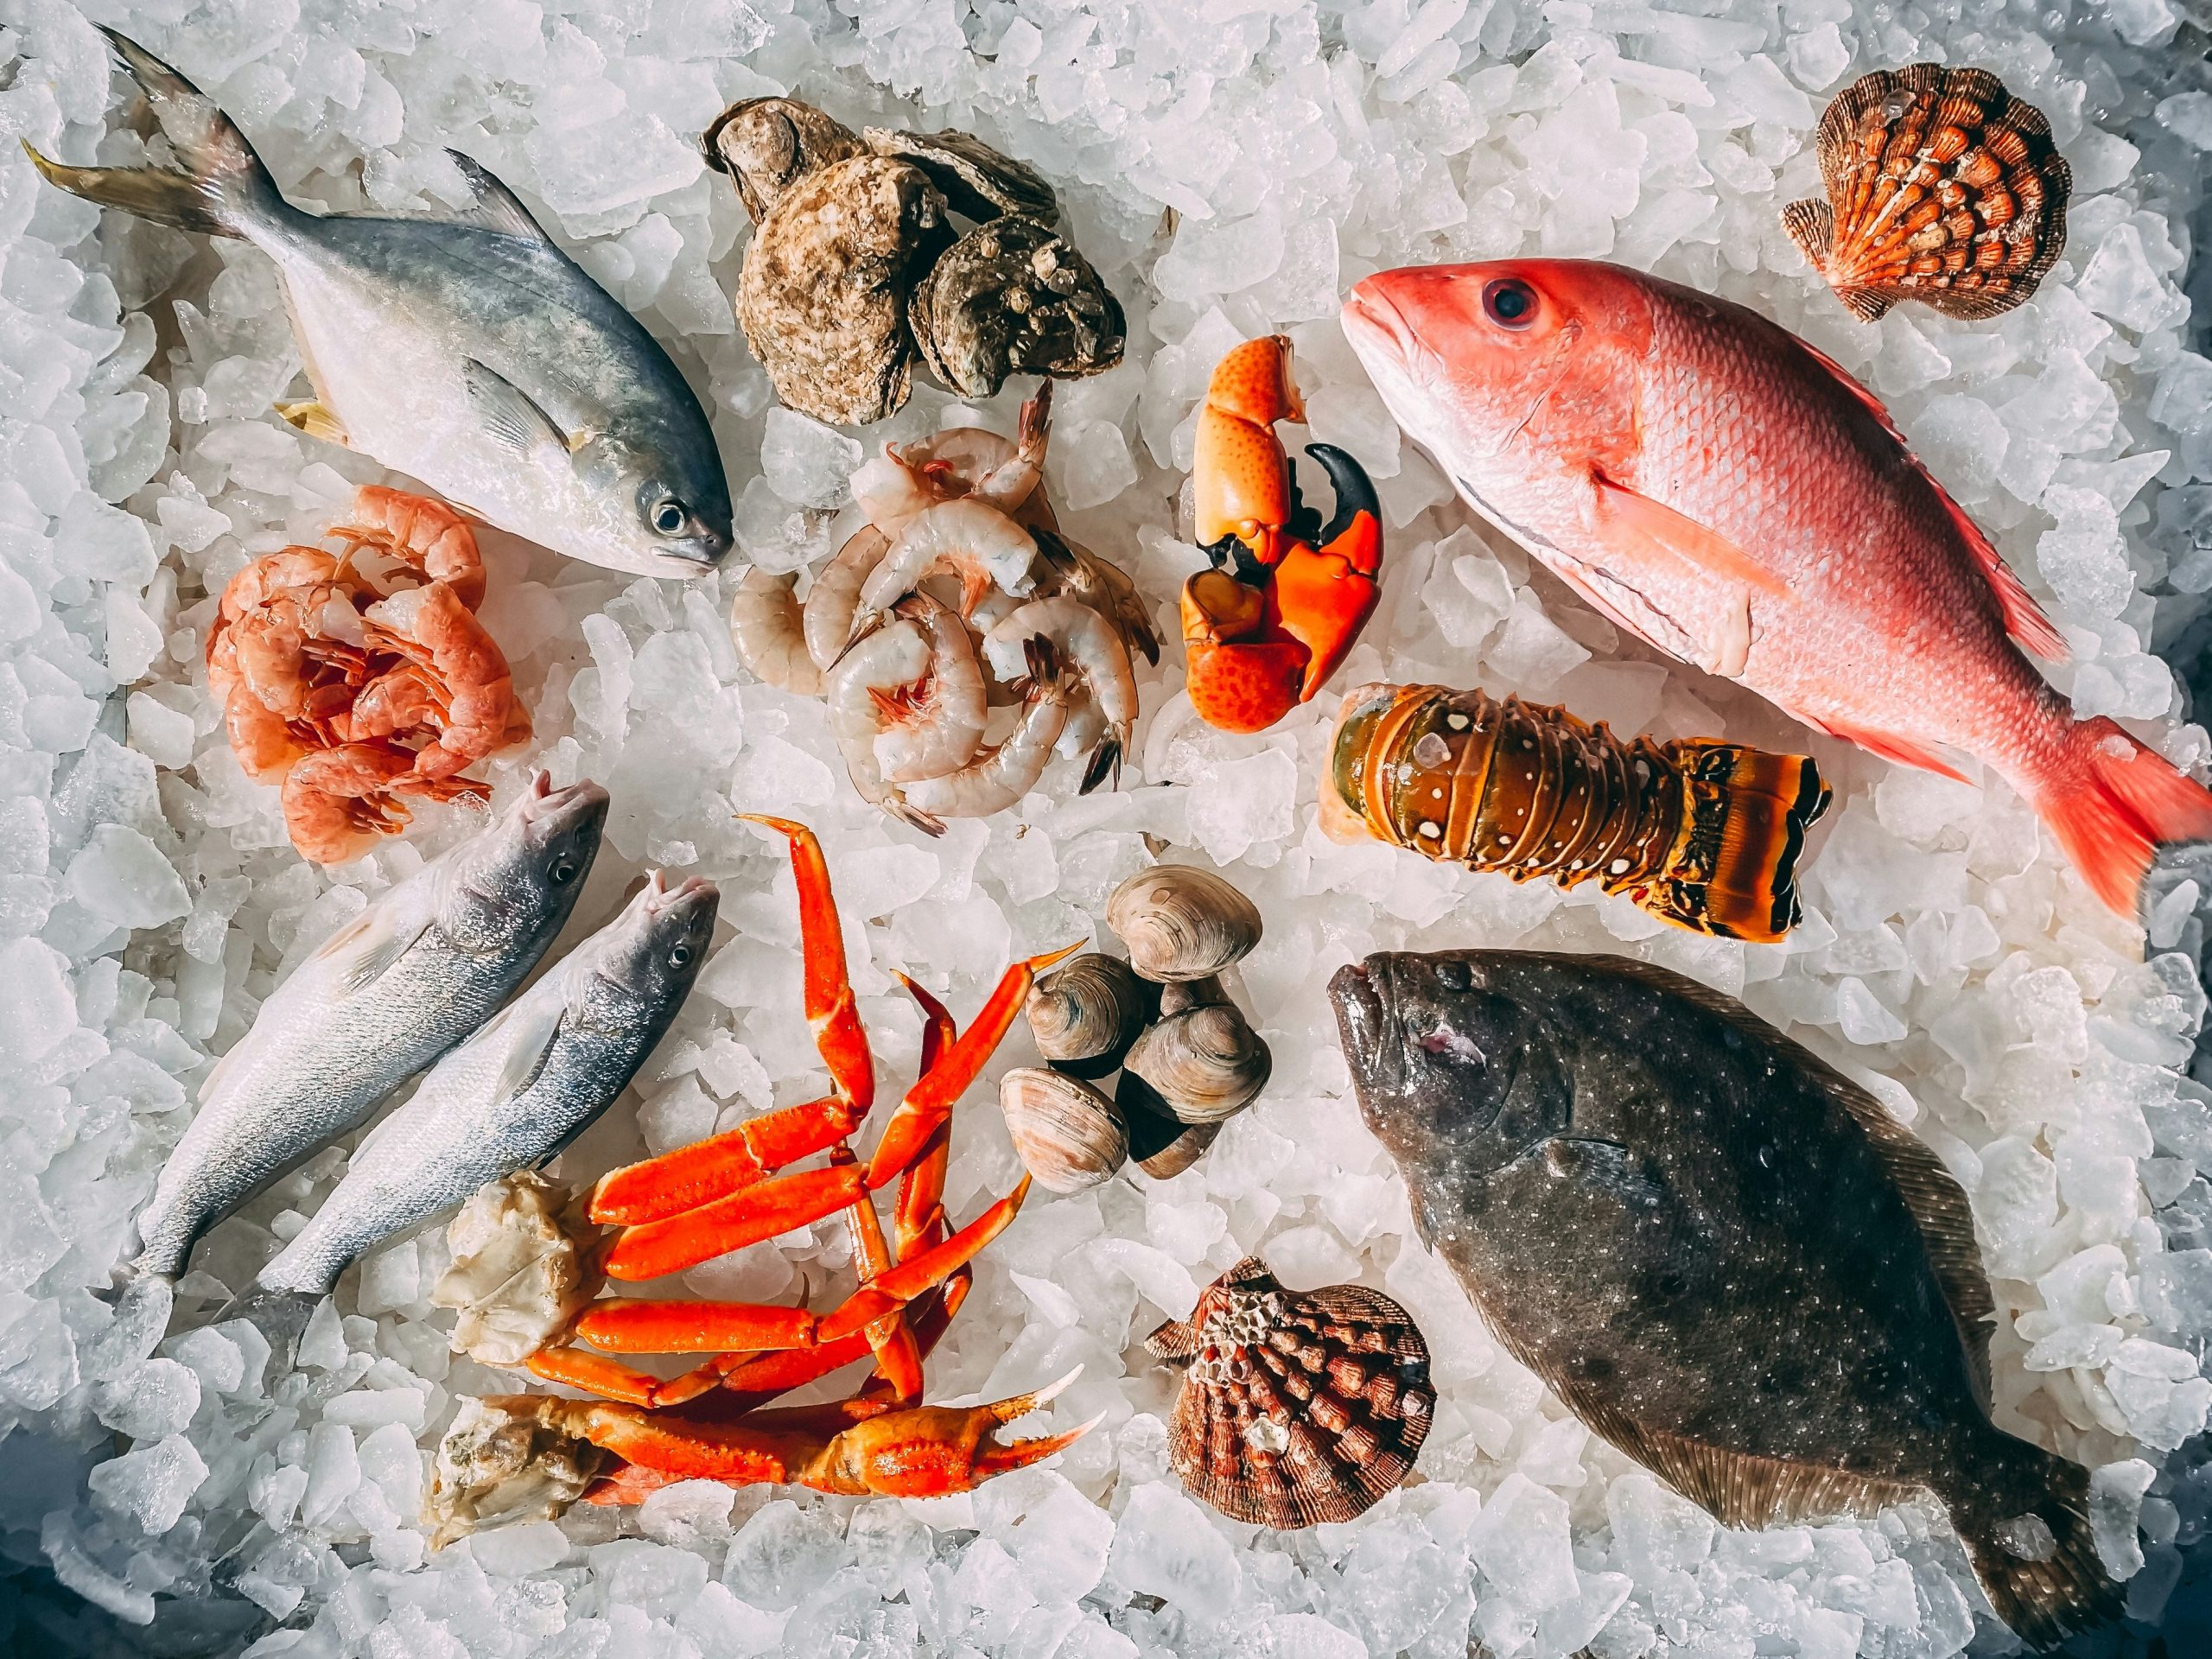 Global Perspectives on Sustainable Seafood Consumption